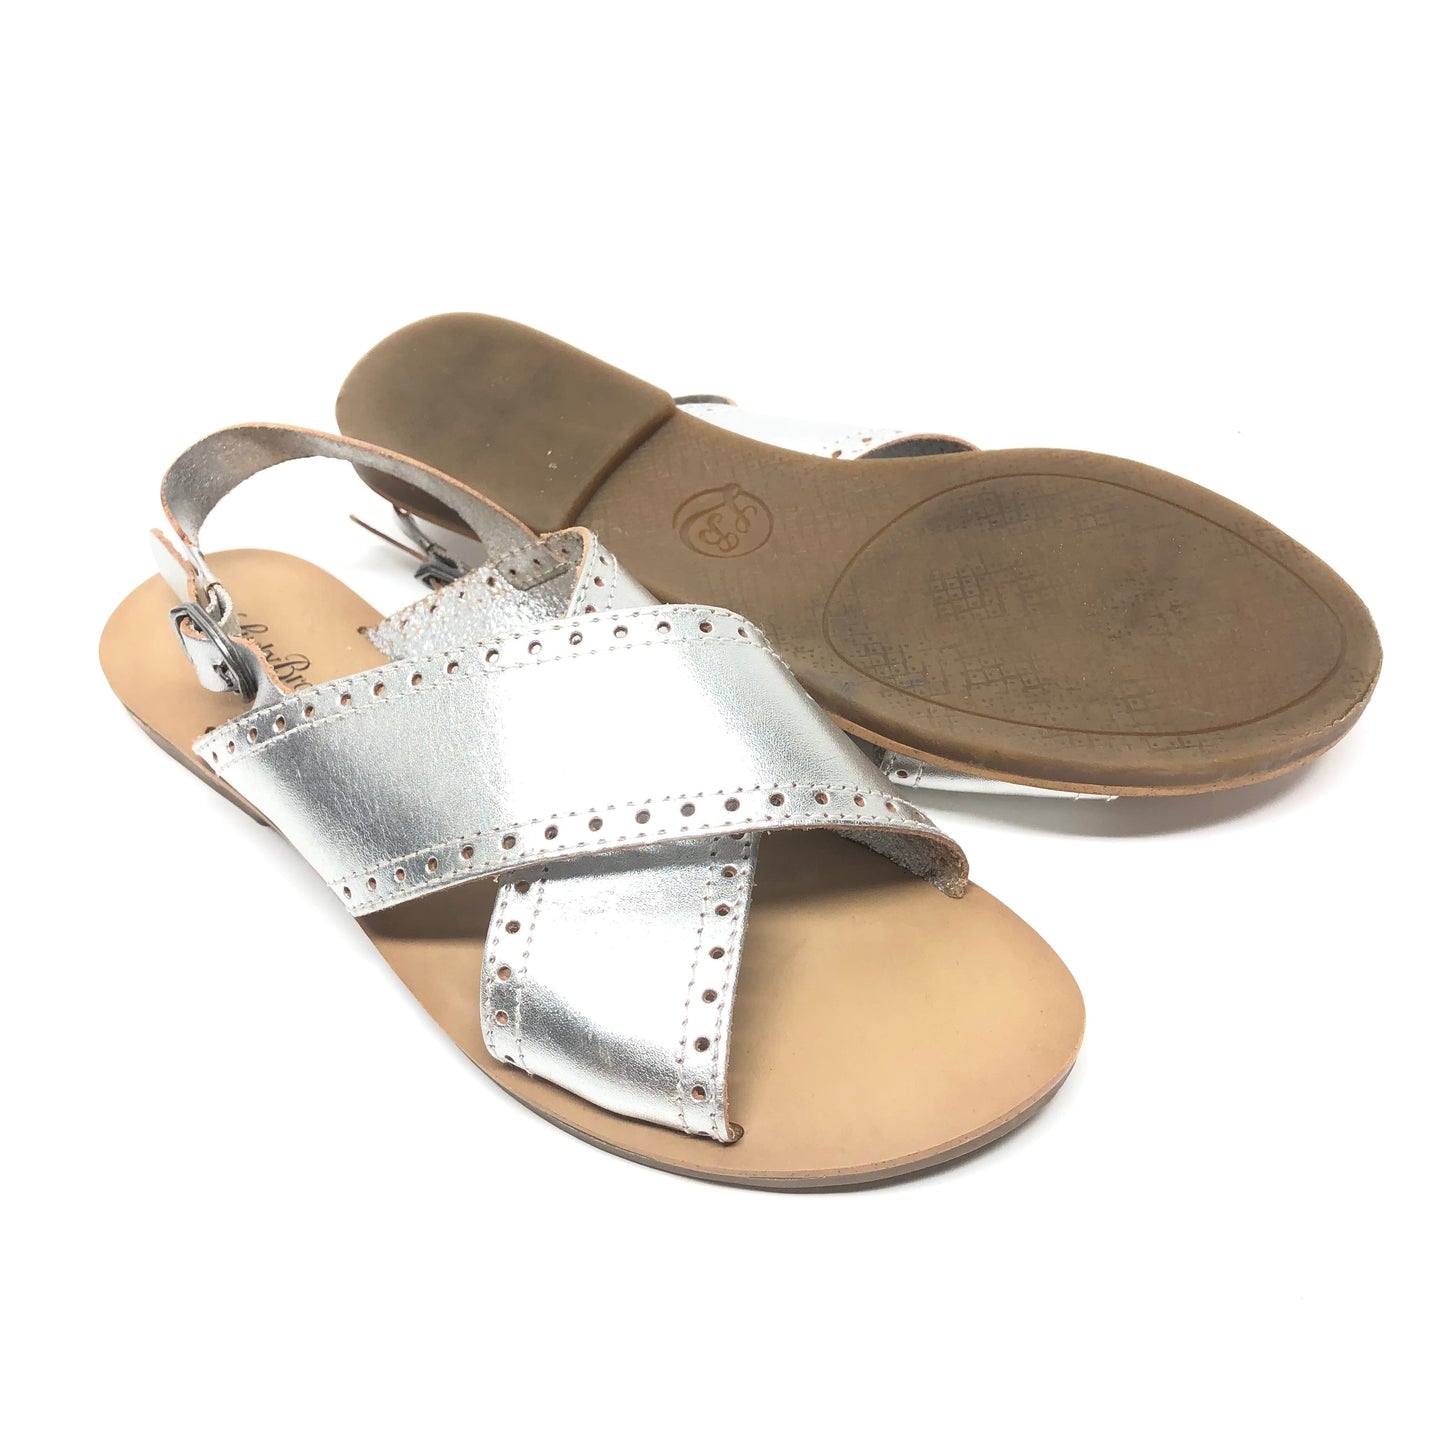 Silver Sandals Flats Lucky Brand, Size 9